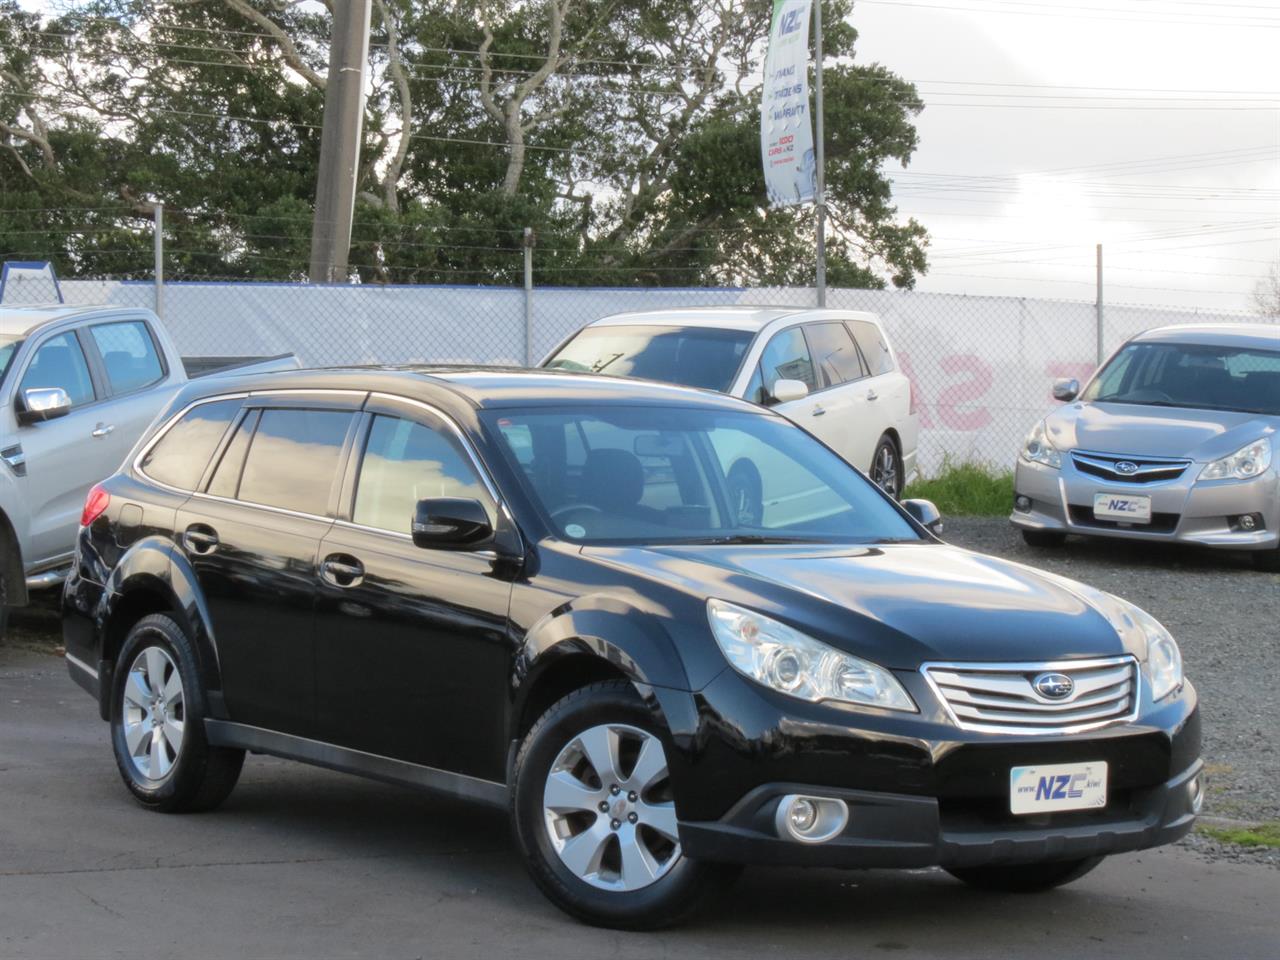 NZC 2009 Subaru Outback just arrived to Auckland